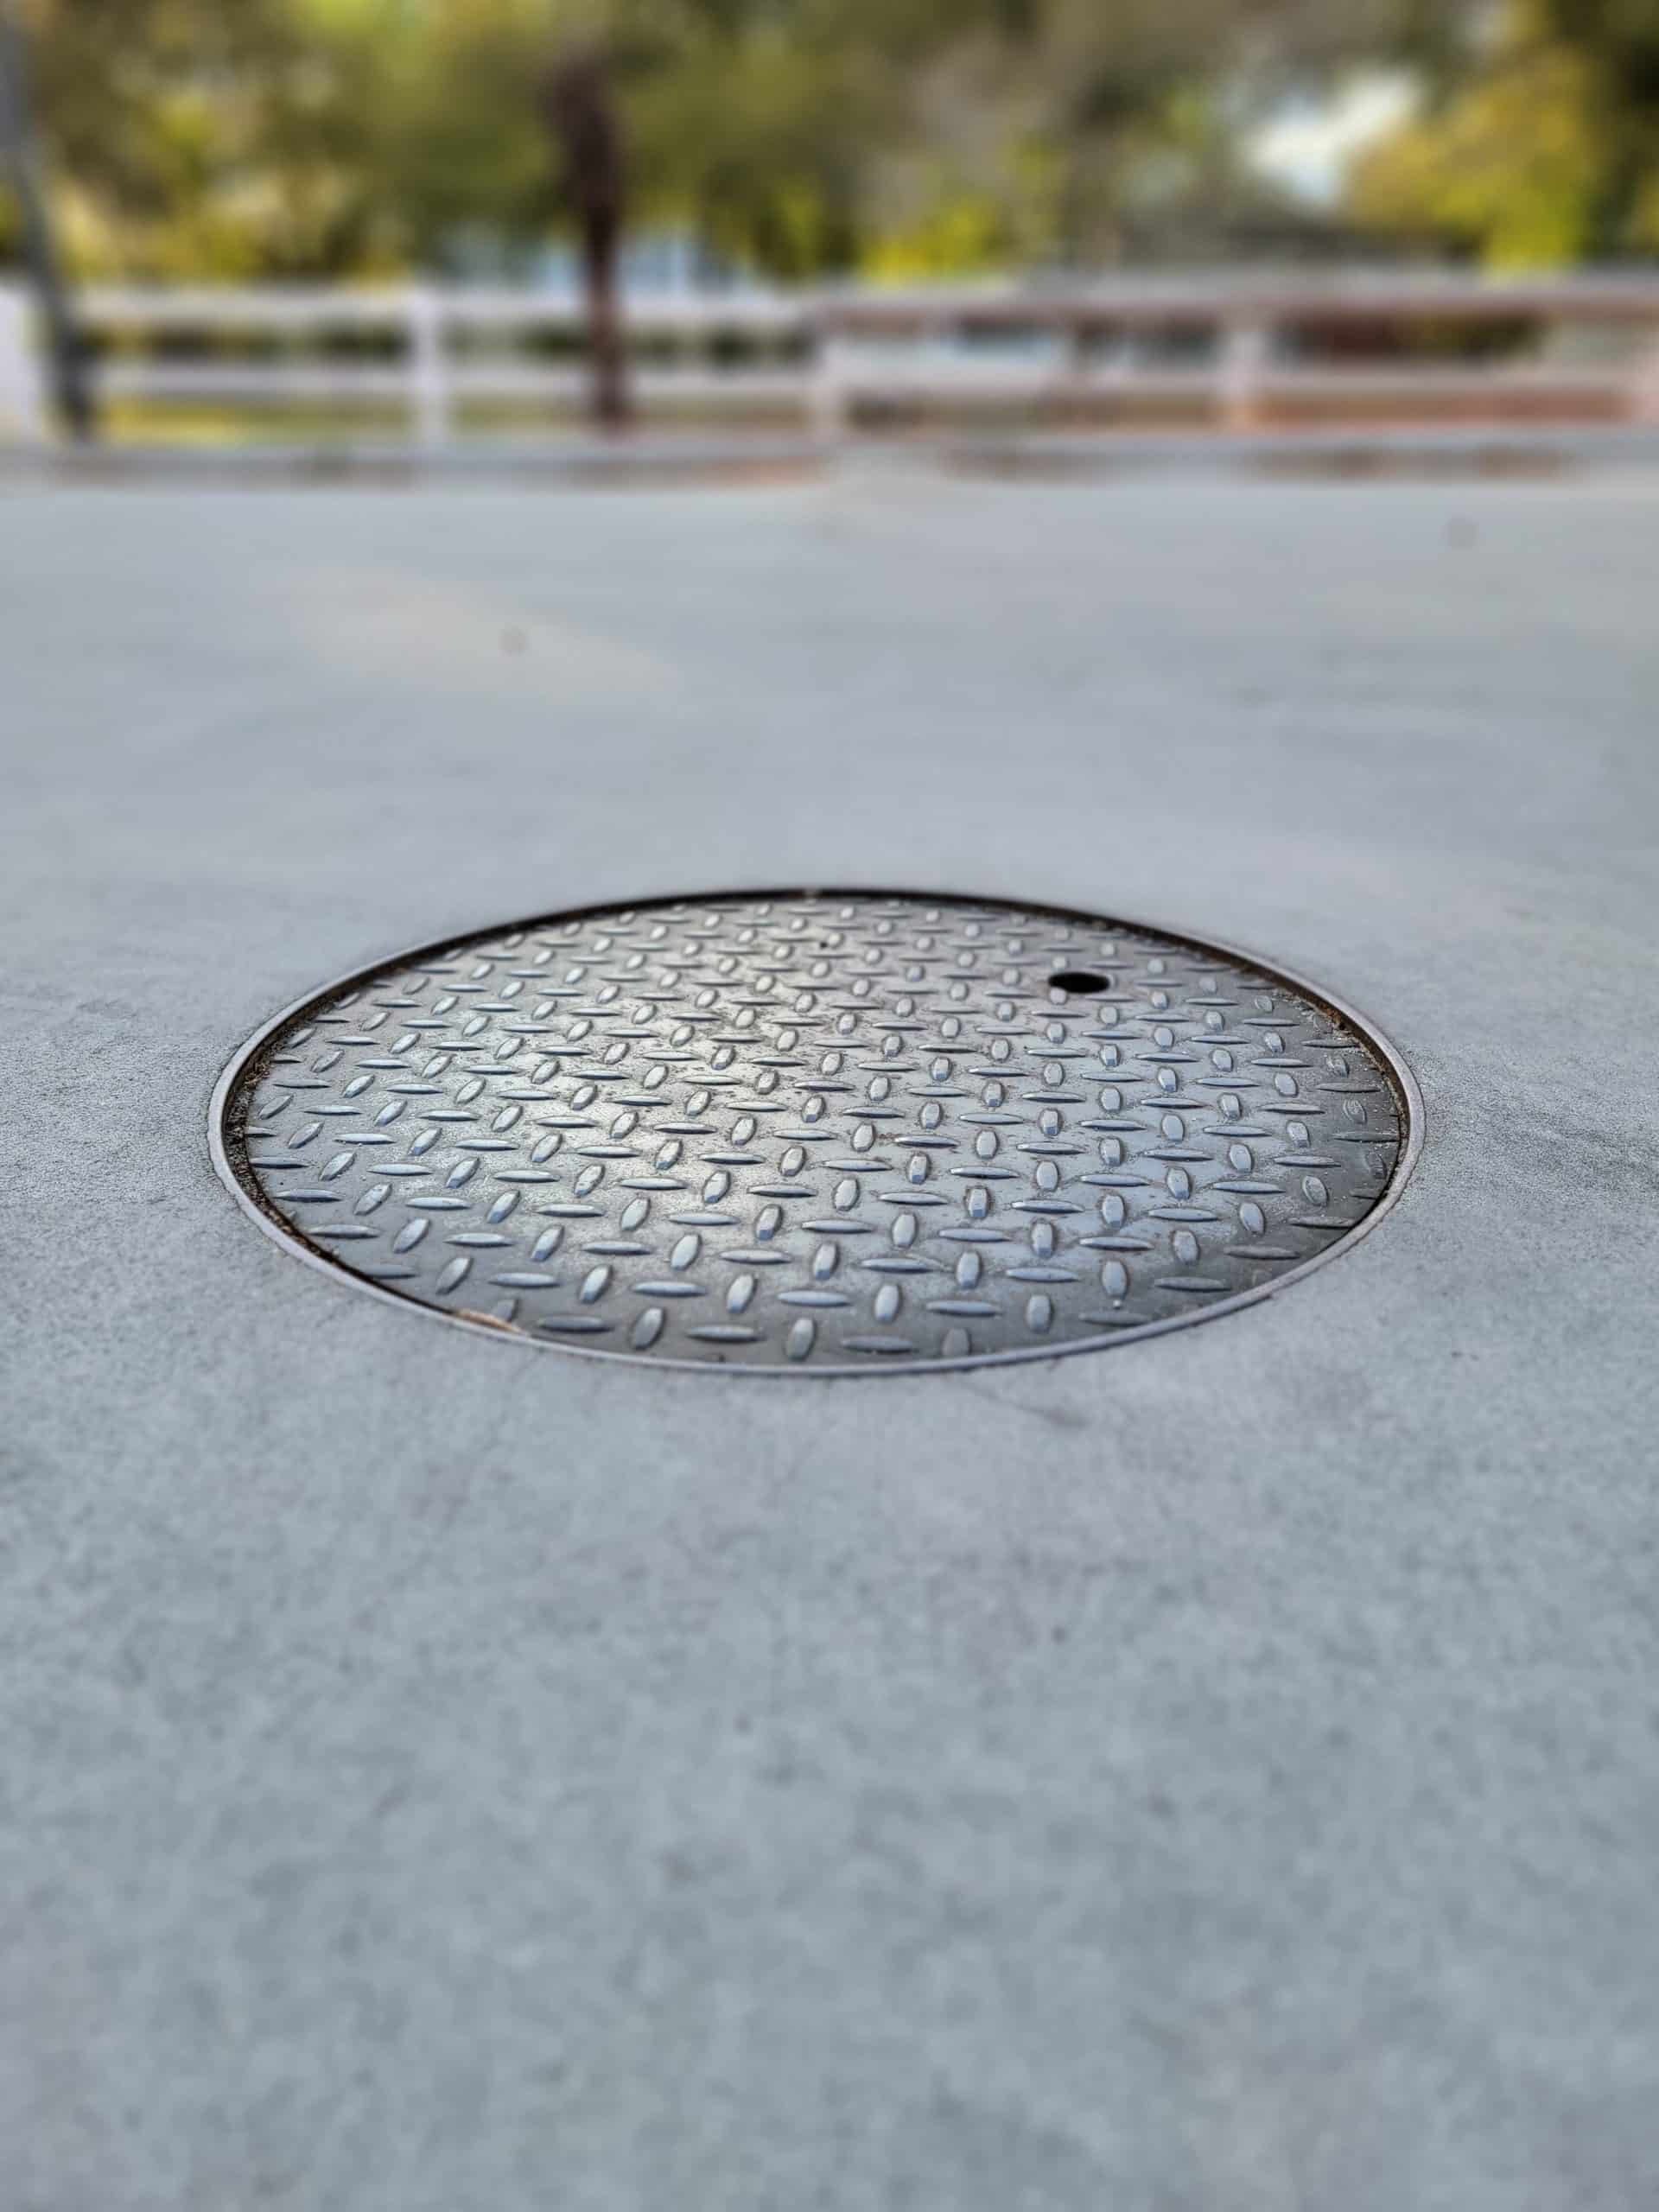 round sewer cover in pavement